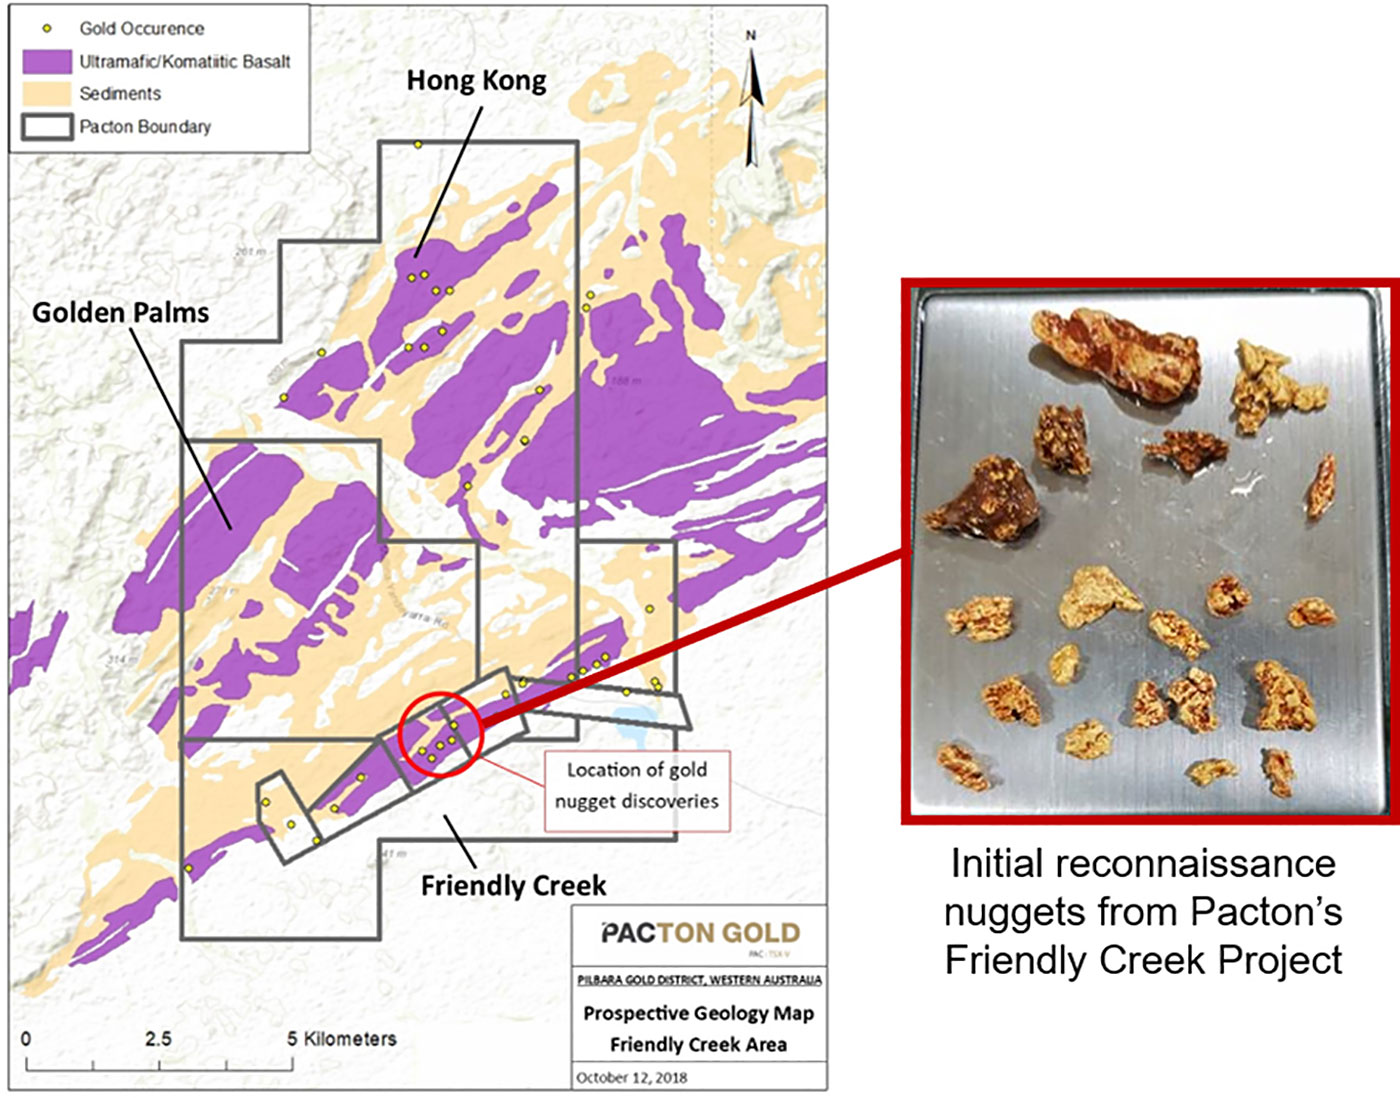 Friendly Creek and adjacent Pacton tenements. Mineralized Mesoarchean basal unit, Western Australia MINEDEX gold occurrences, and location of recent gold nugget discoveries (circle).